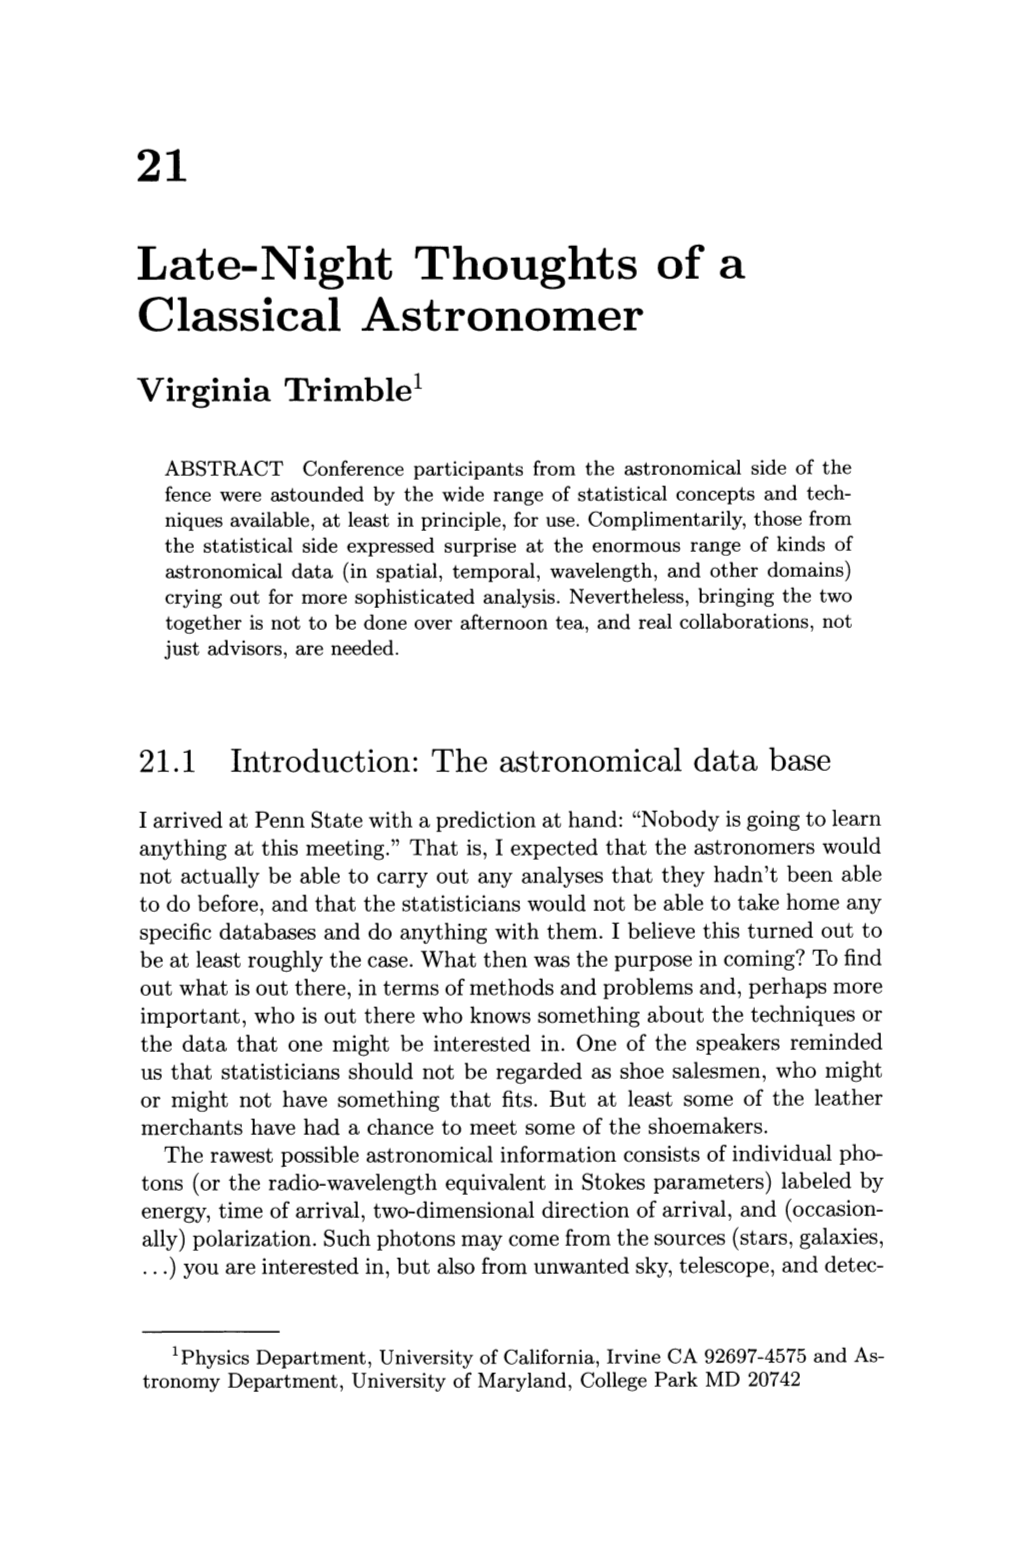 Late-Night Thoughts of a Classical Astronomer